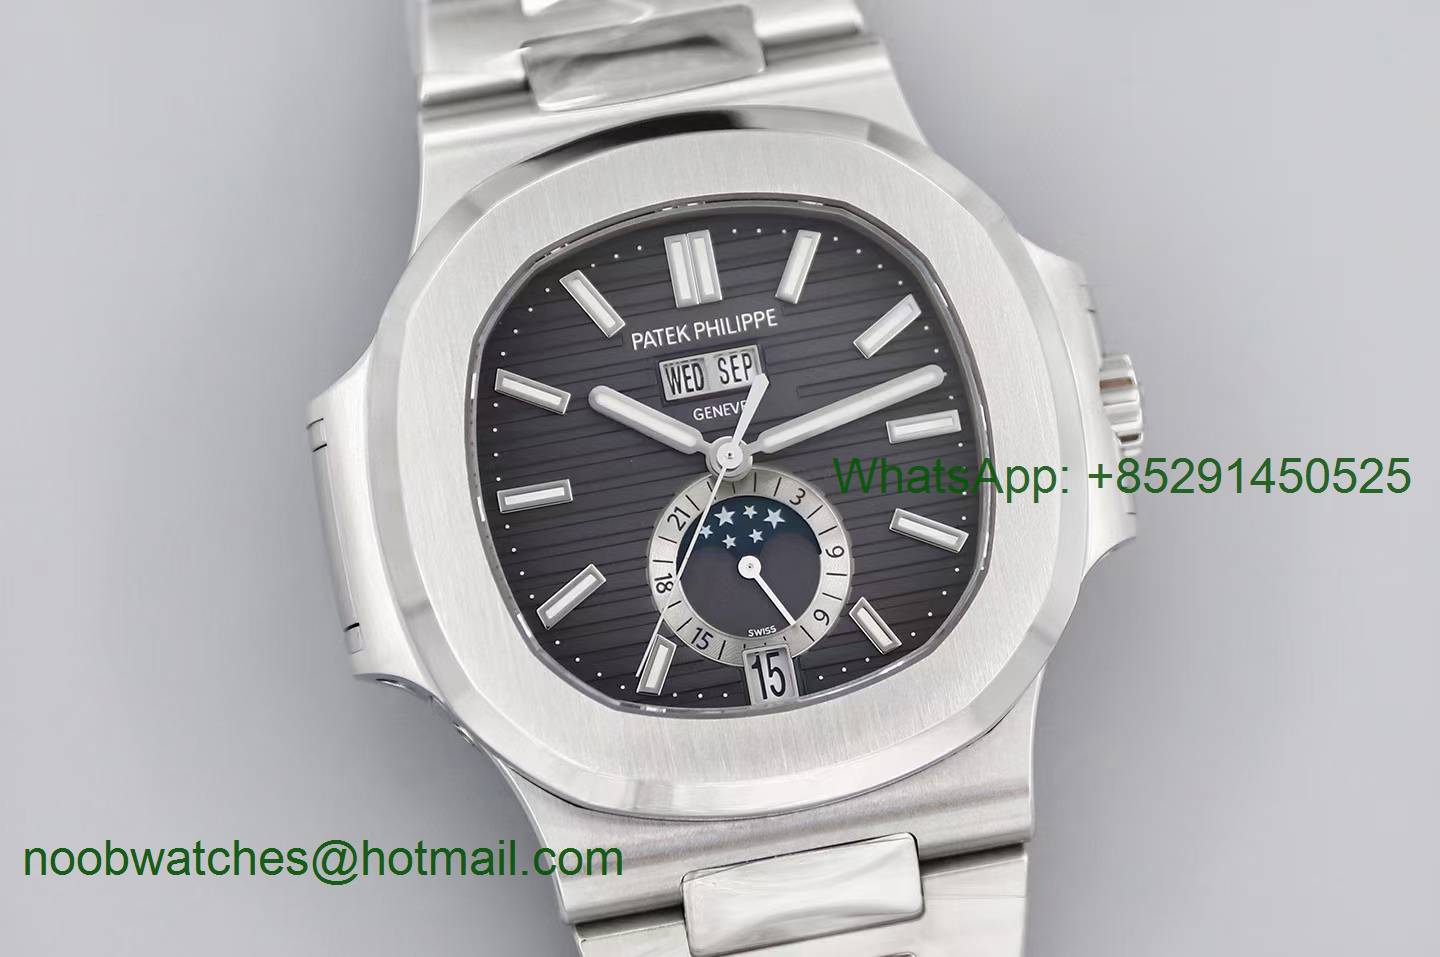 Replica Patek Philippe Nautilus 5726 Full Function Moonphase PPF 1:1 Best Gray Dial A324